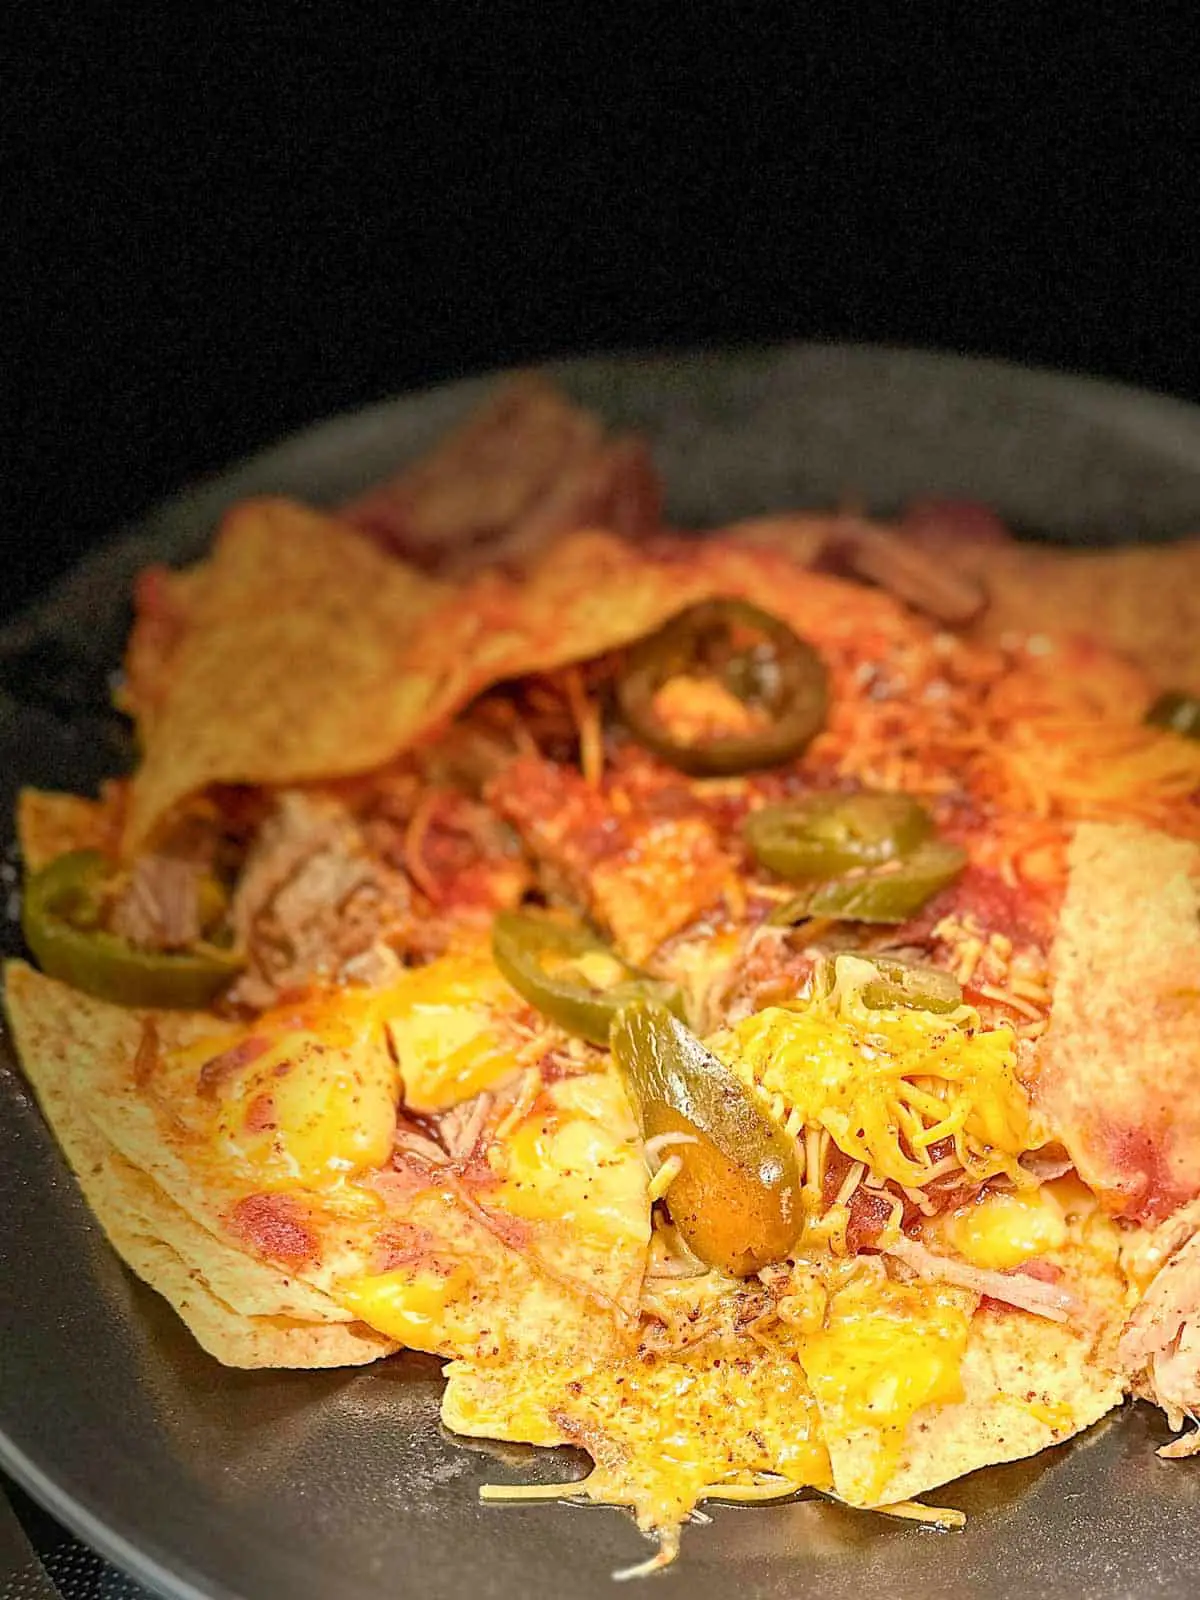 Tortilla chips topped with cheese sauce, shredded cheese, barbecue sauce, jalapeños and pulled pork on a black plate with dry rub sprinkled on top.